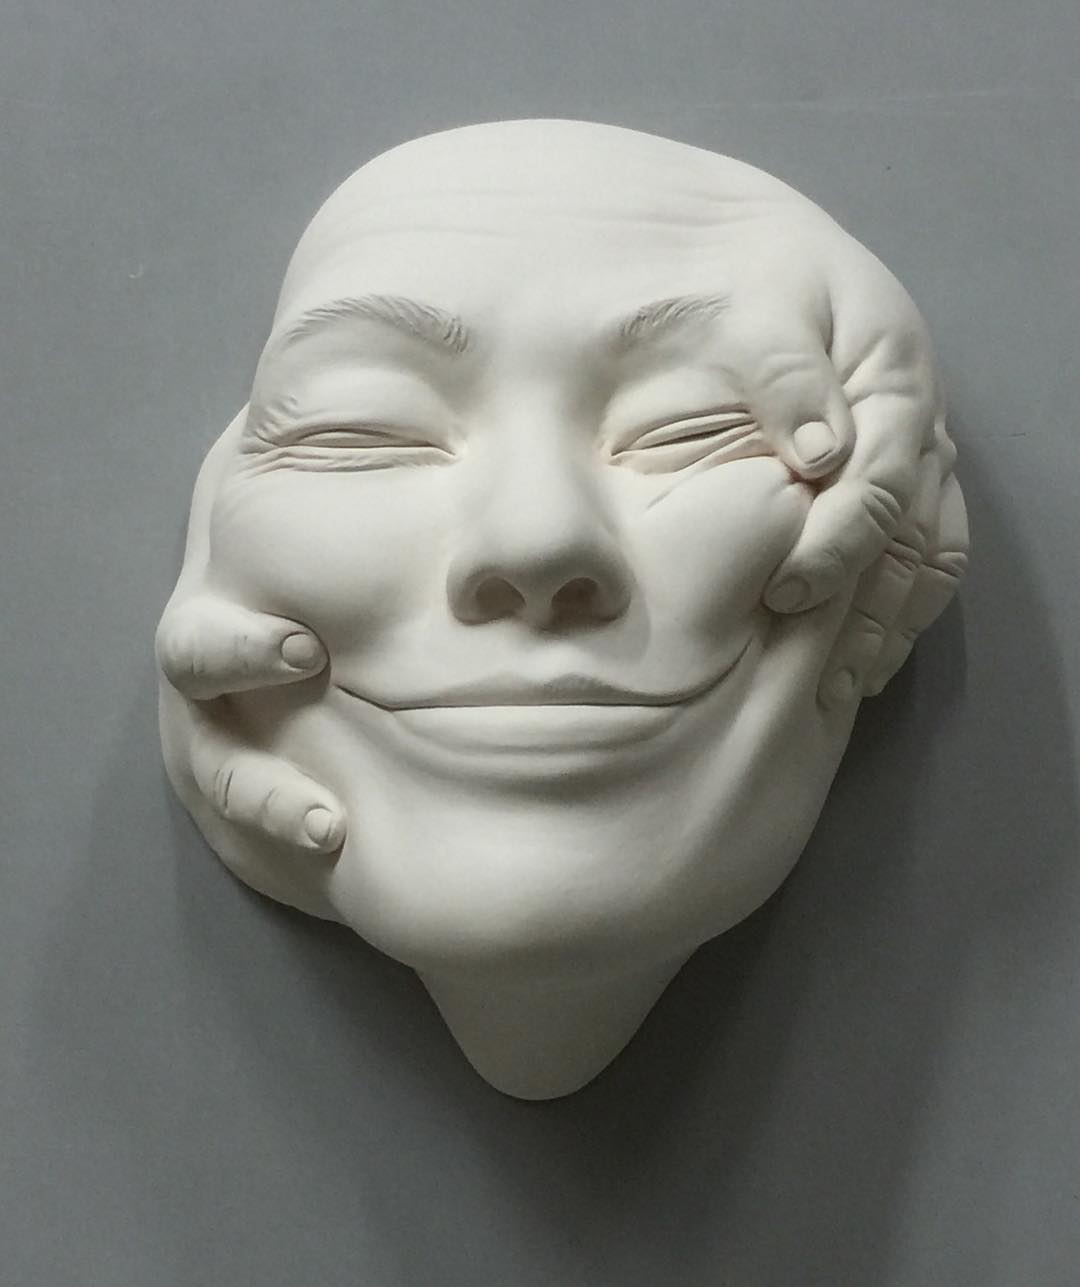 Spectacular ceramic sculptures of the human faces by Johnson Tsangs